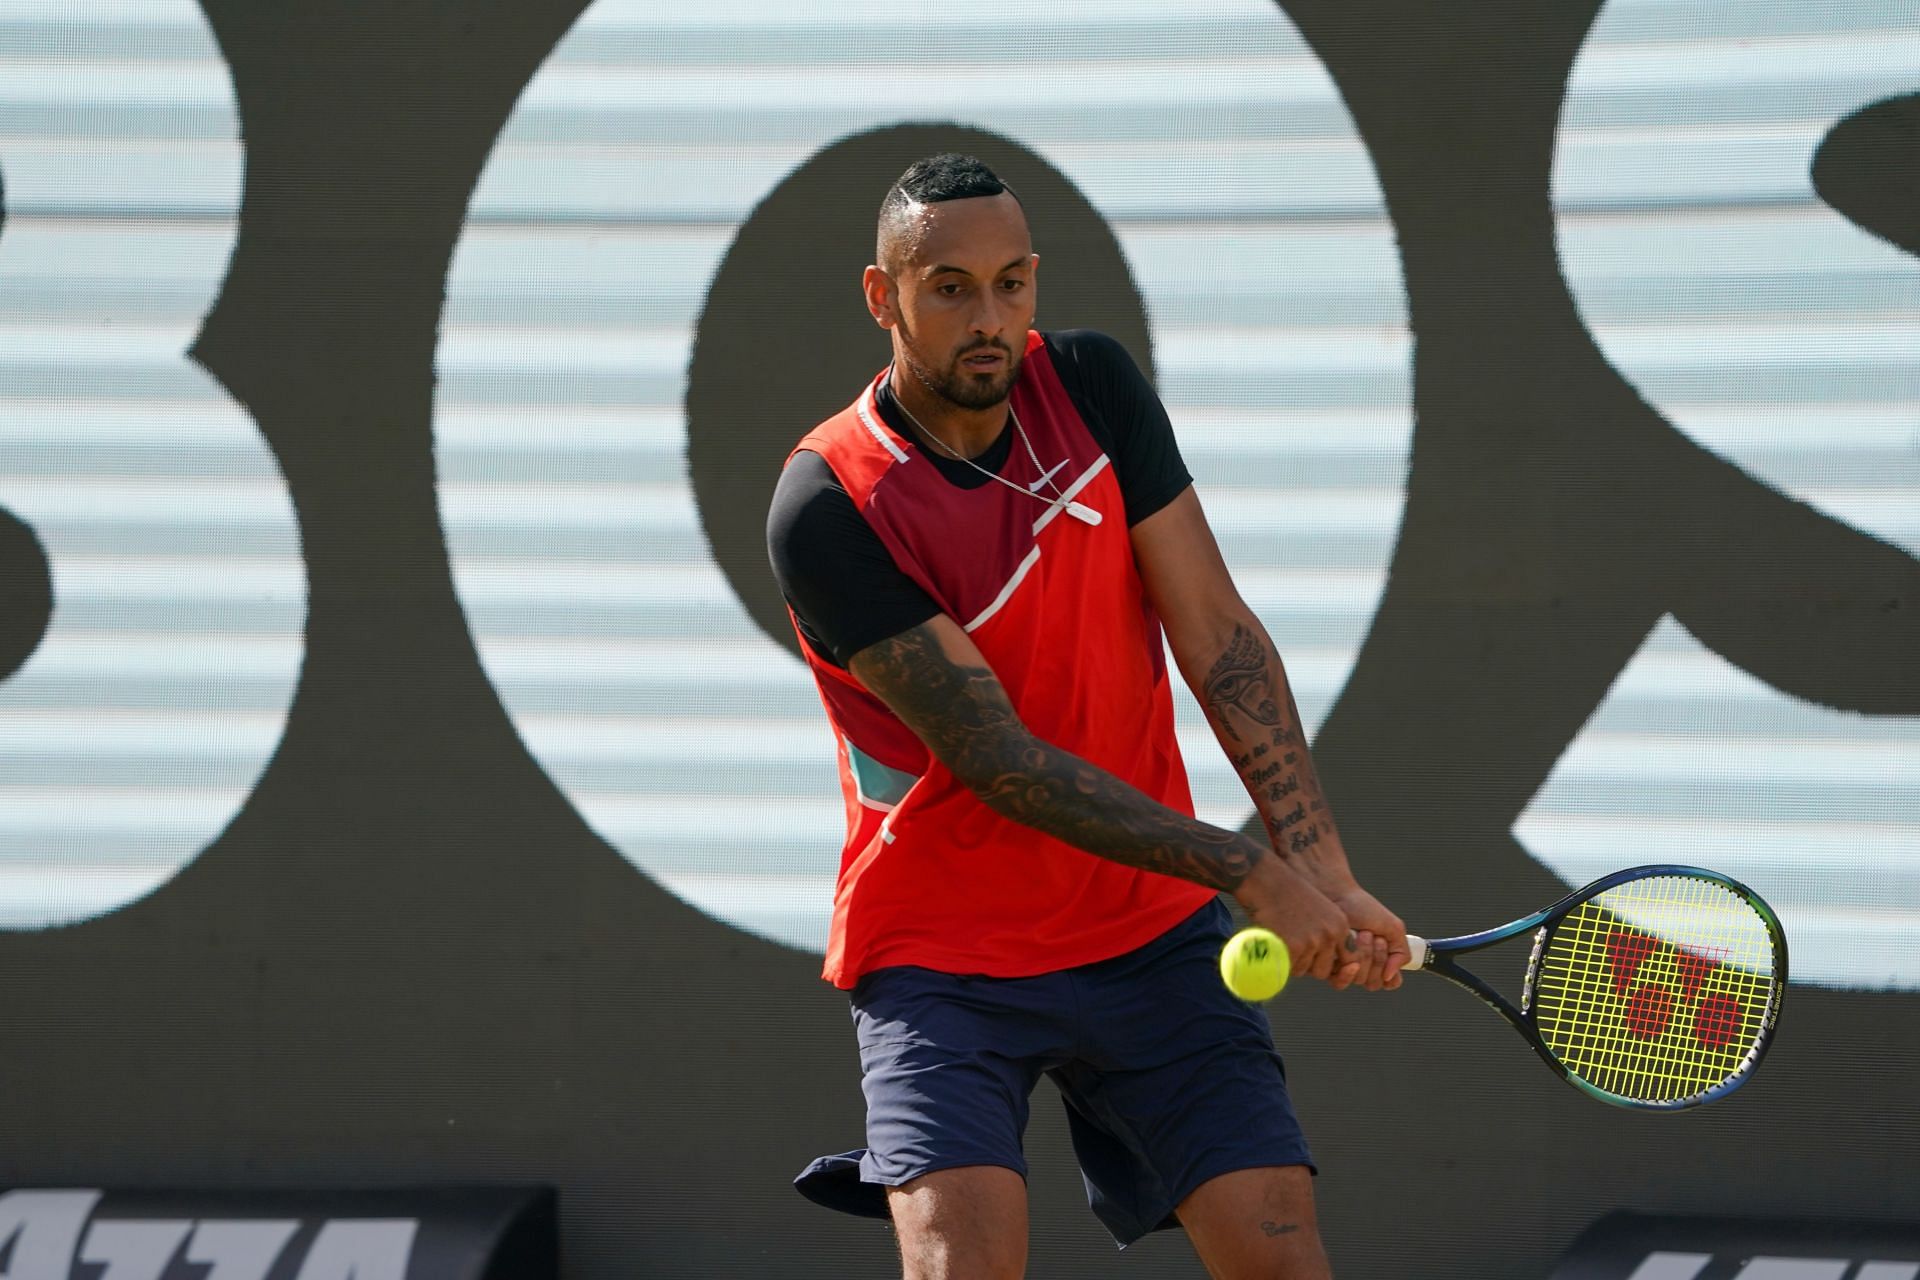 Nick Kyrgios also touched on his goals for the 2022 season